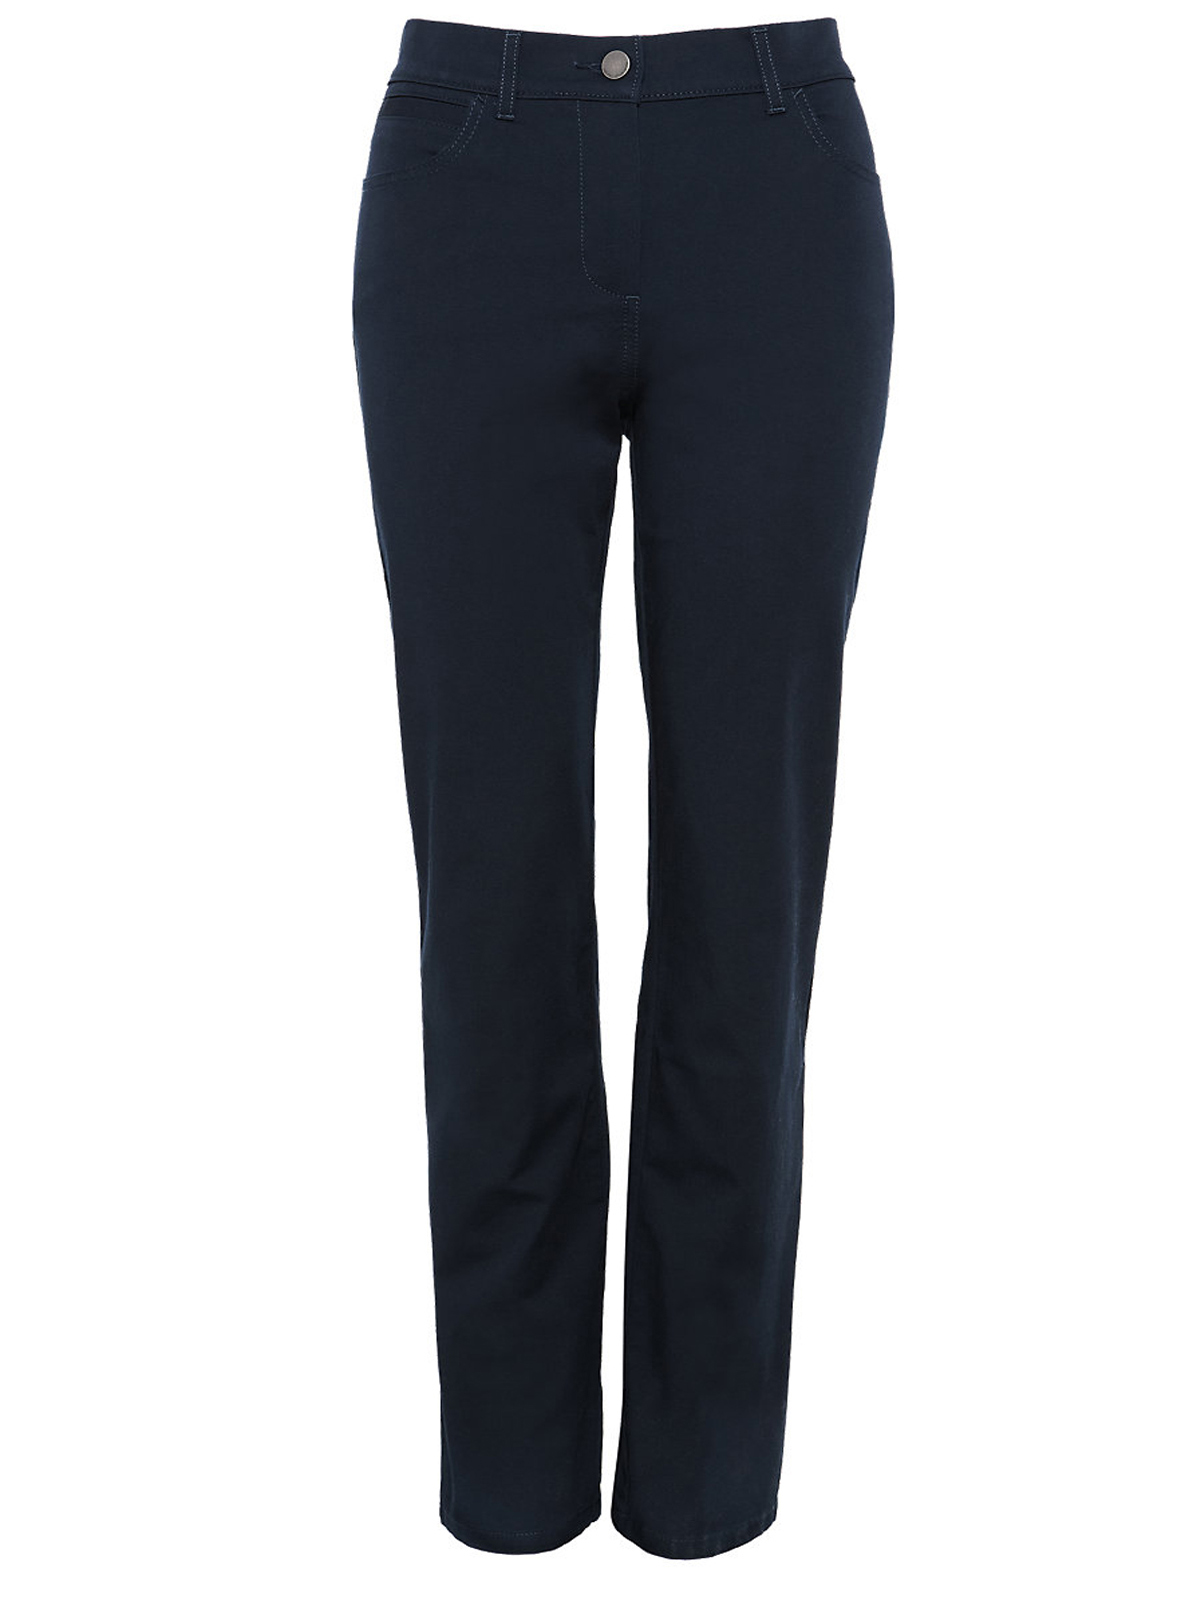 Marks and Spencer - - M&5 ASSORTED Ladies Trousers - Size 8 to 20